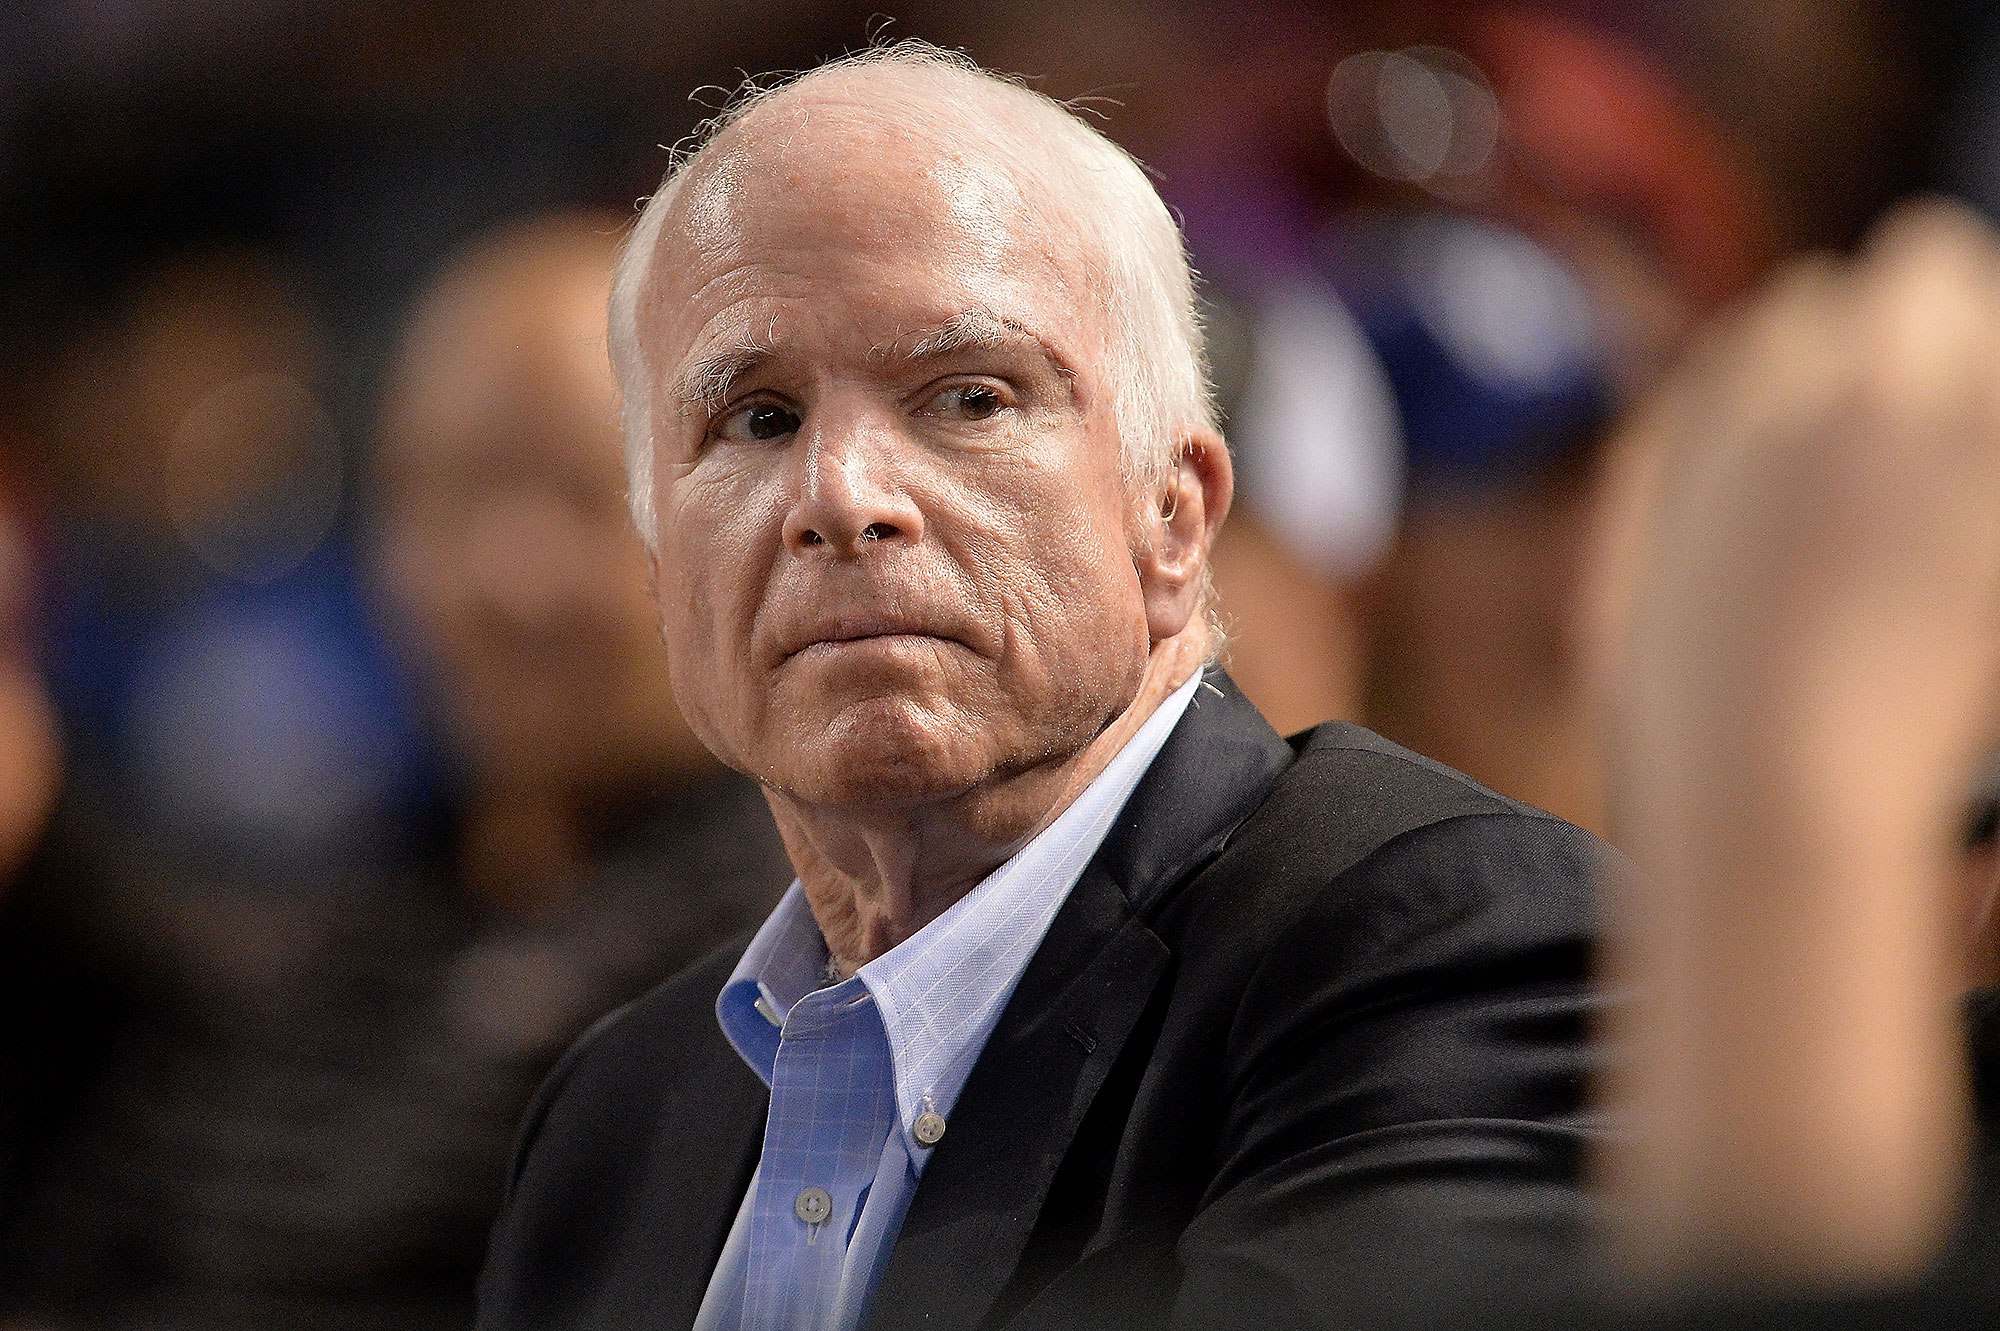 John McCain Liked to Gamble and Helped Make US Tribal Gaming Possible, but Long Opposed Sports Betting Expansion